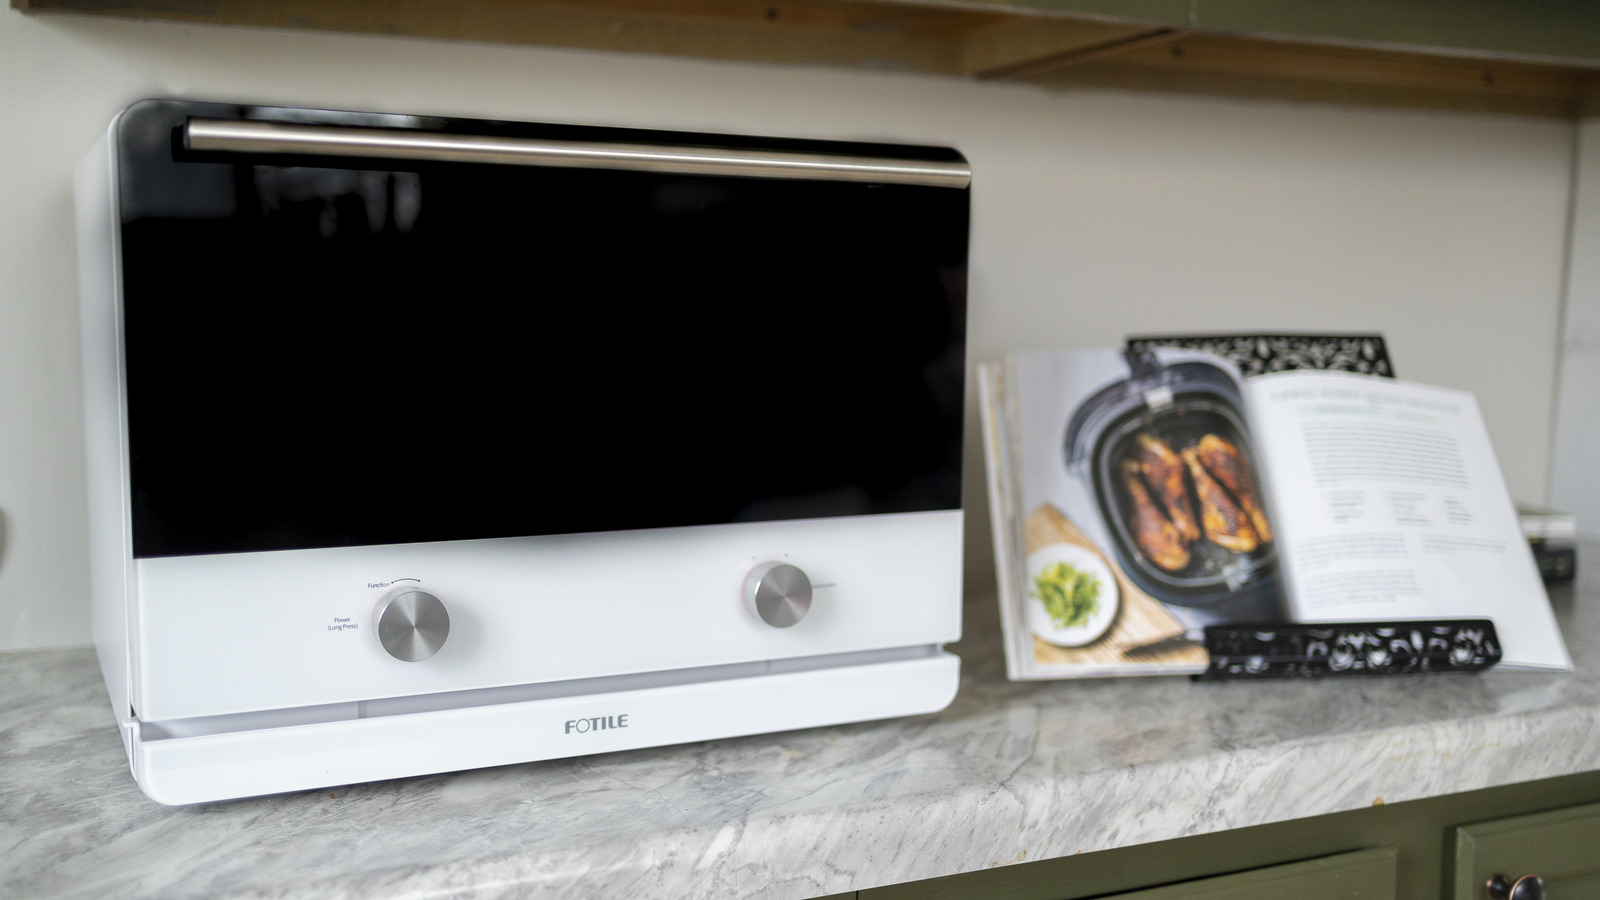 Fotile ChefCubii E1 Review: Countertop Steam Oven Convenience With